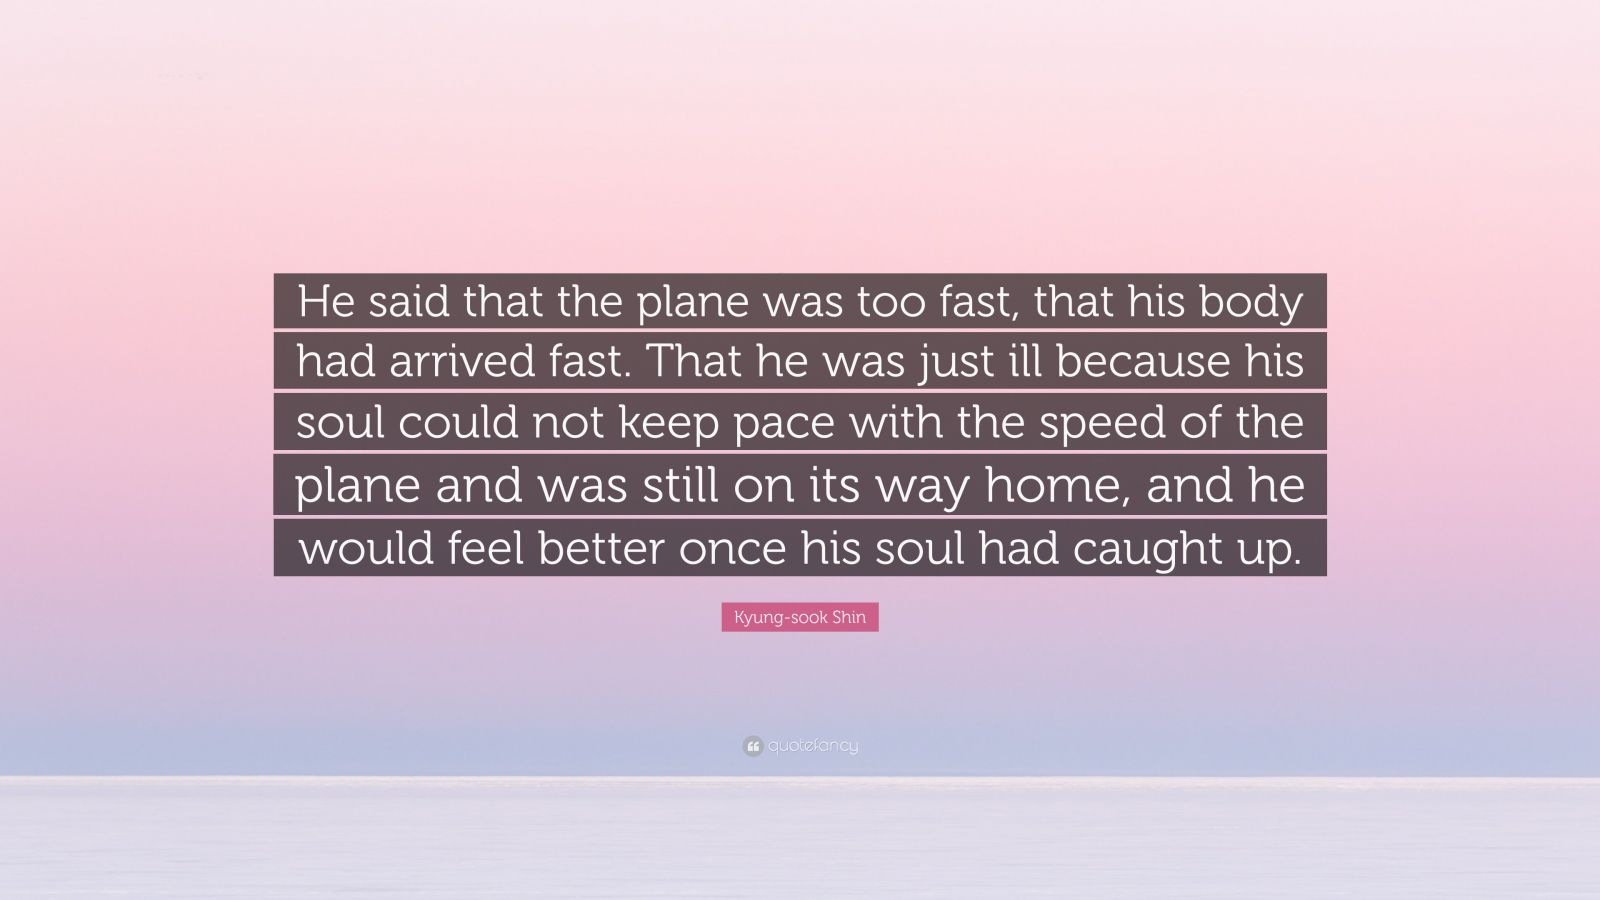 Kyung-sook Shin Quote: “He said that the plane was too fast, that